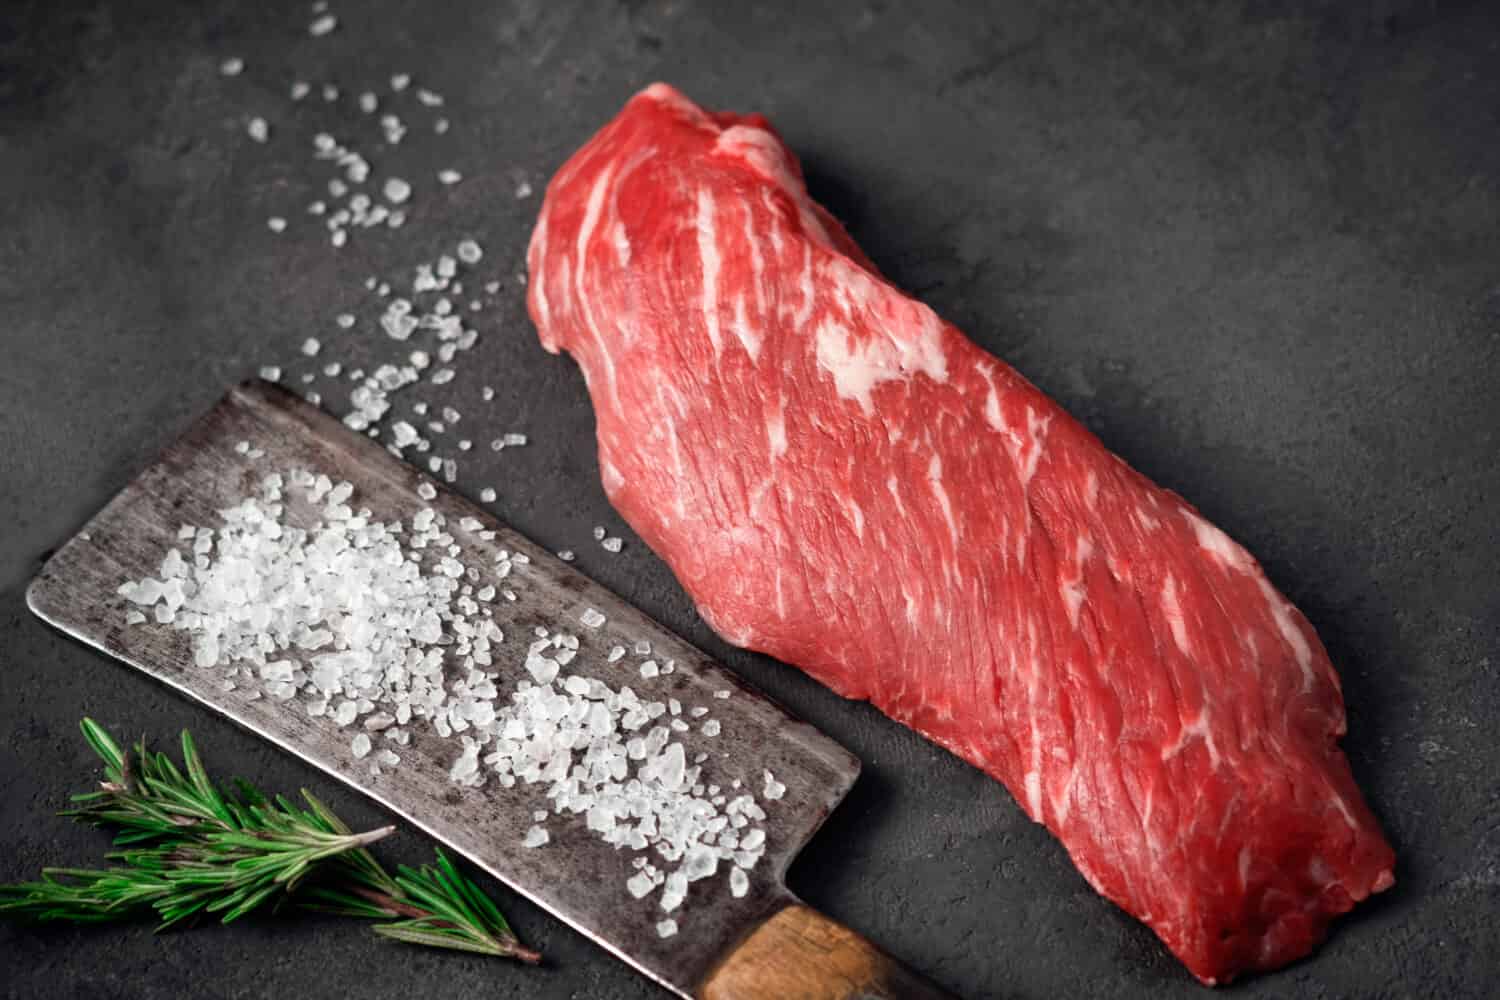 Raw tenderloin of beef or skirt steak with a hatchet for meat, salt and rosemary on a dark stone background, close up